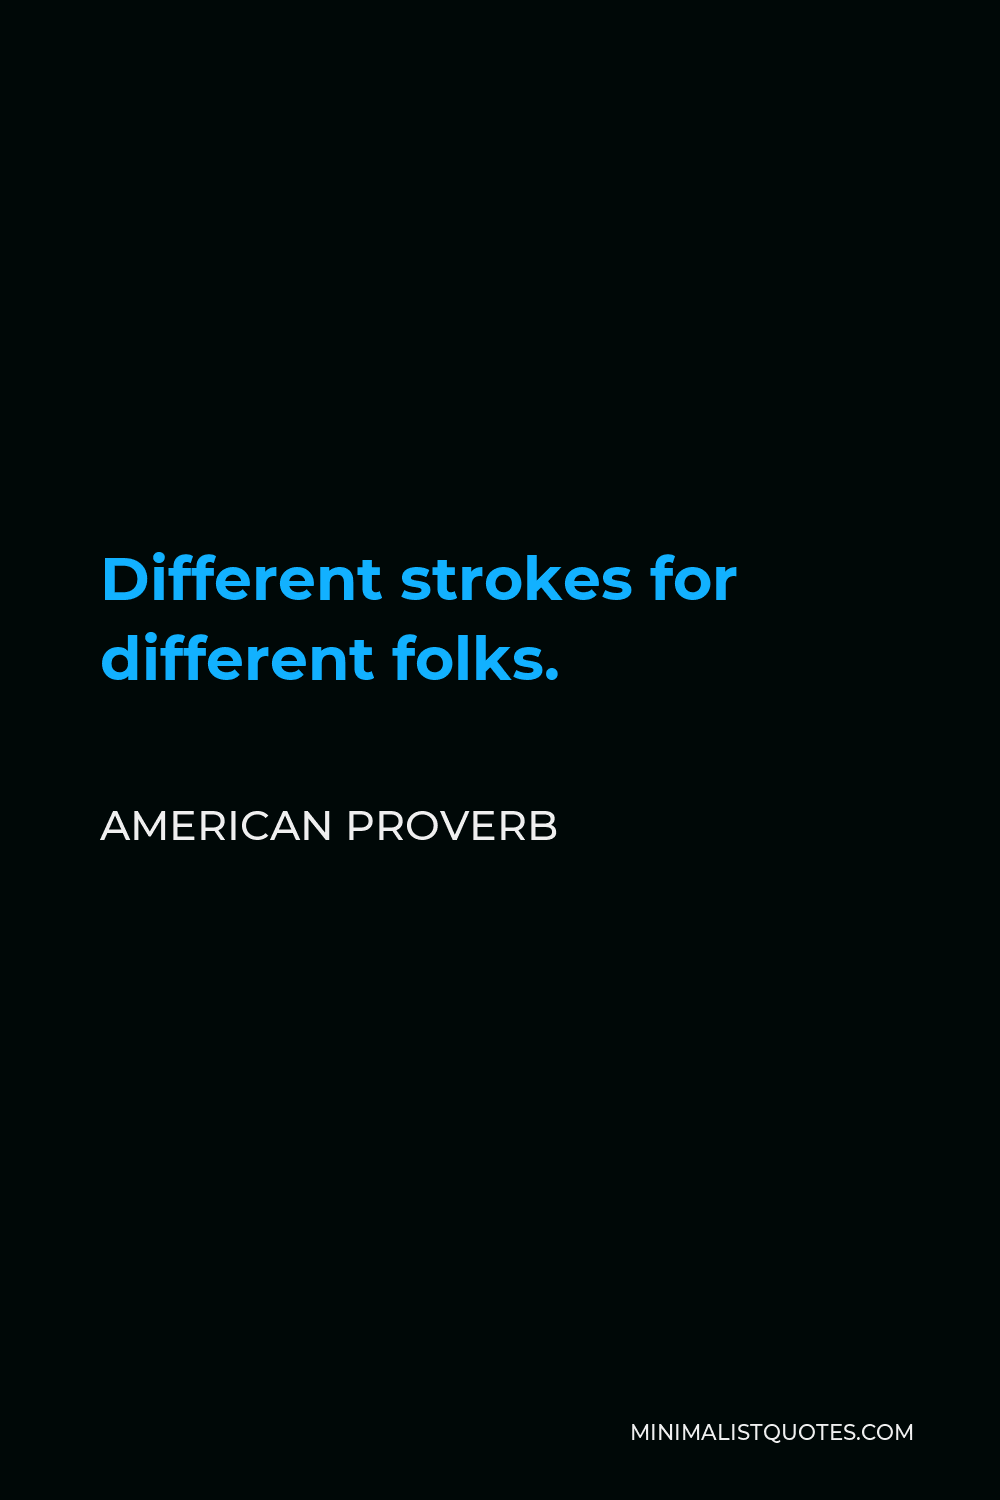 American Proverb Quote - Different strokes for different folks.